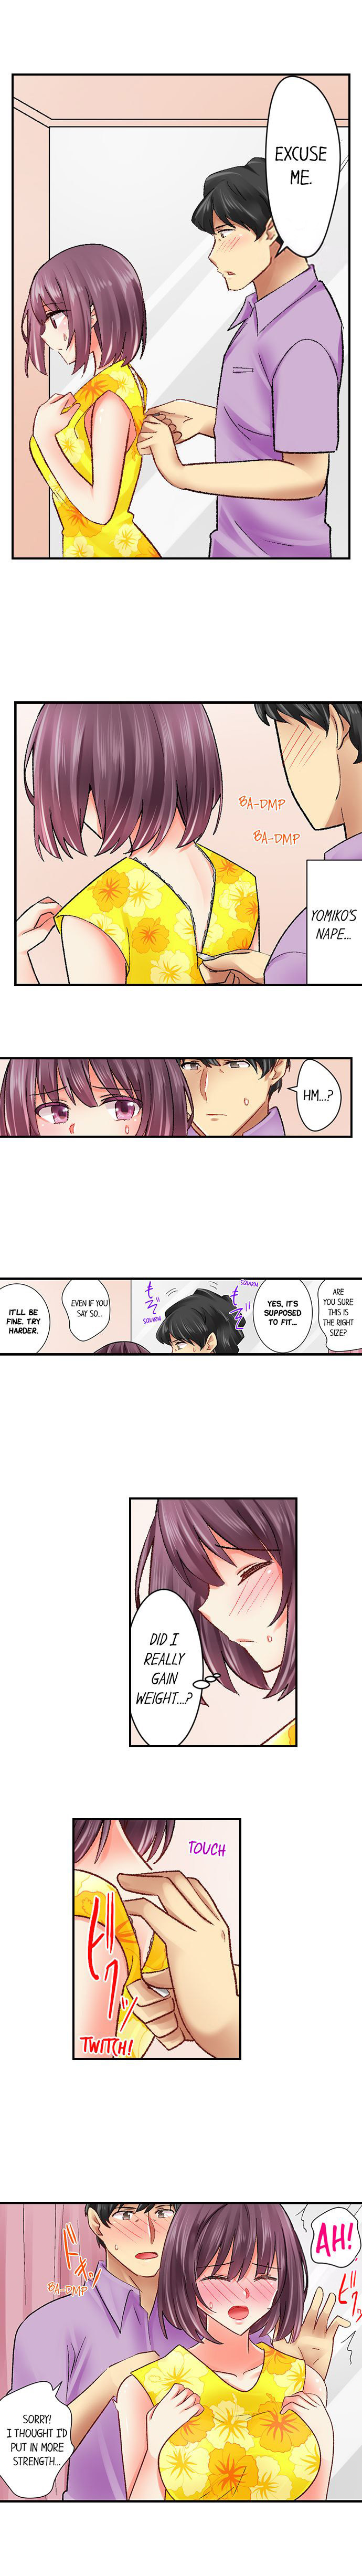 Our Kinky Newlywed Life - Chapter 49 Page 6